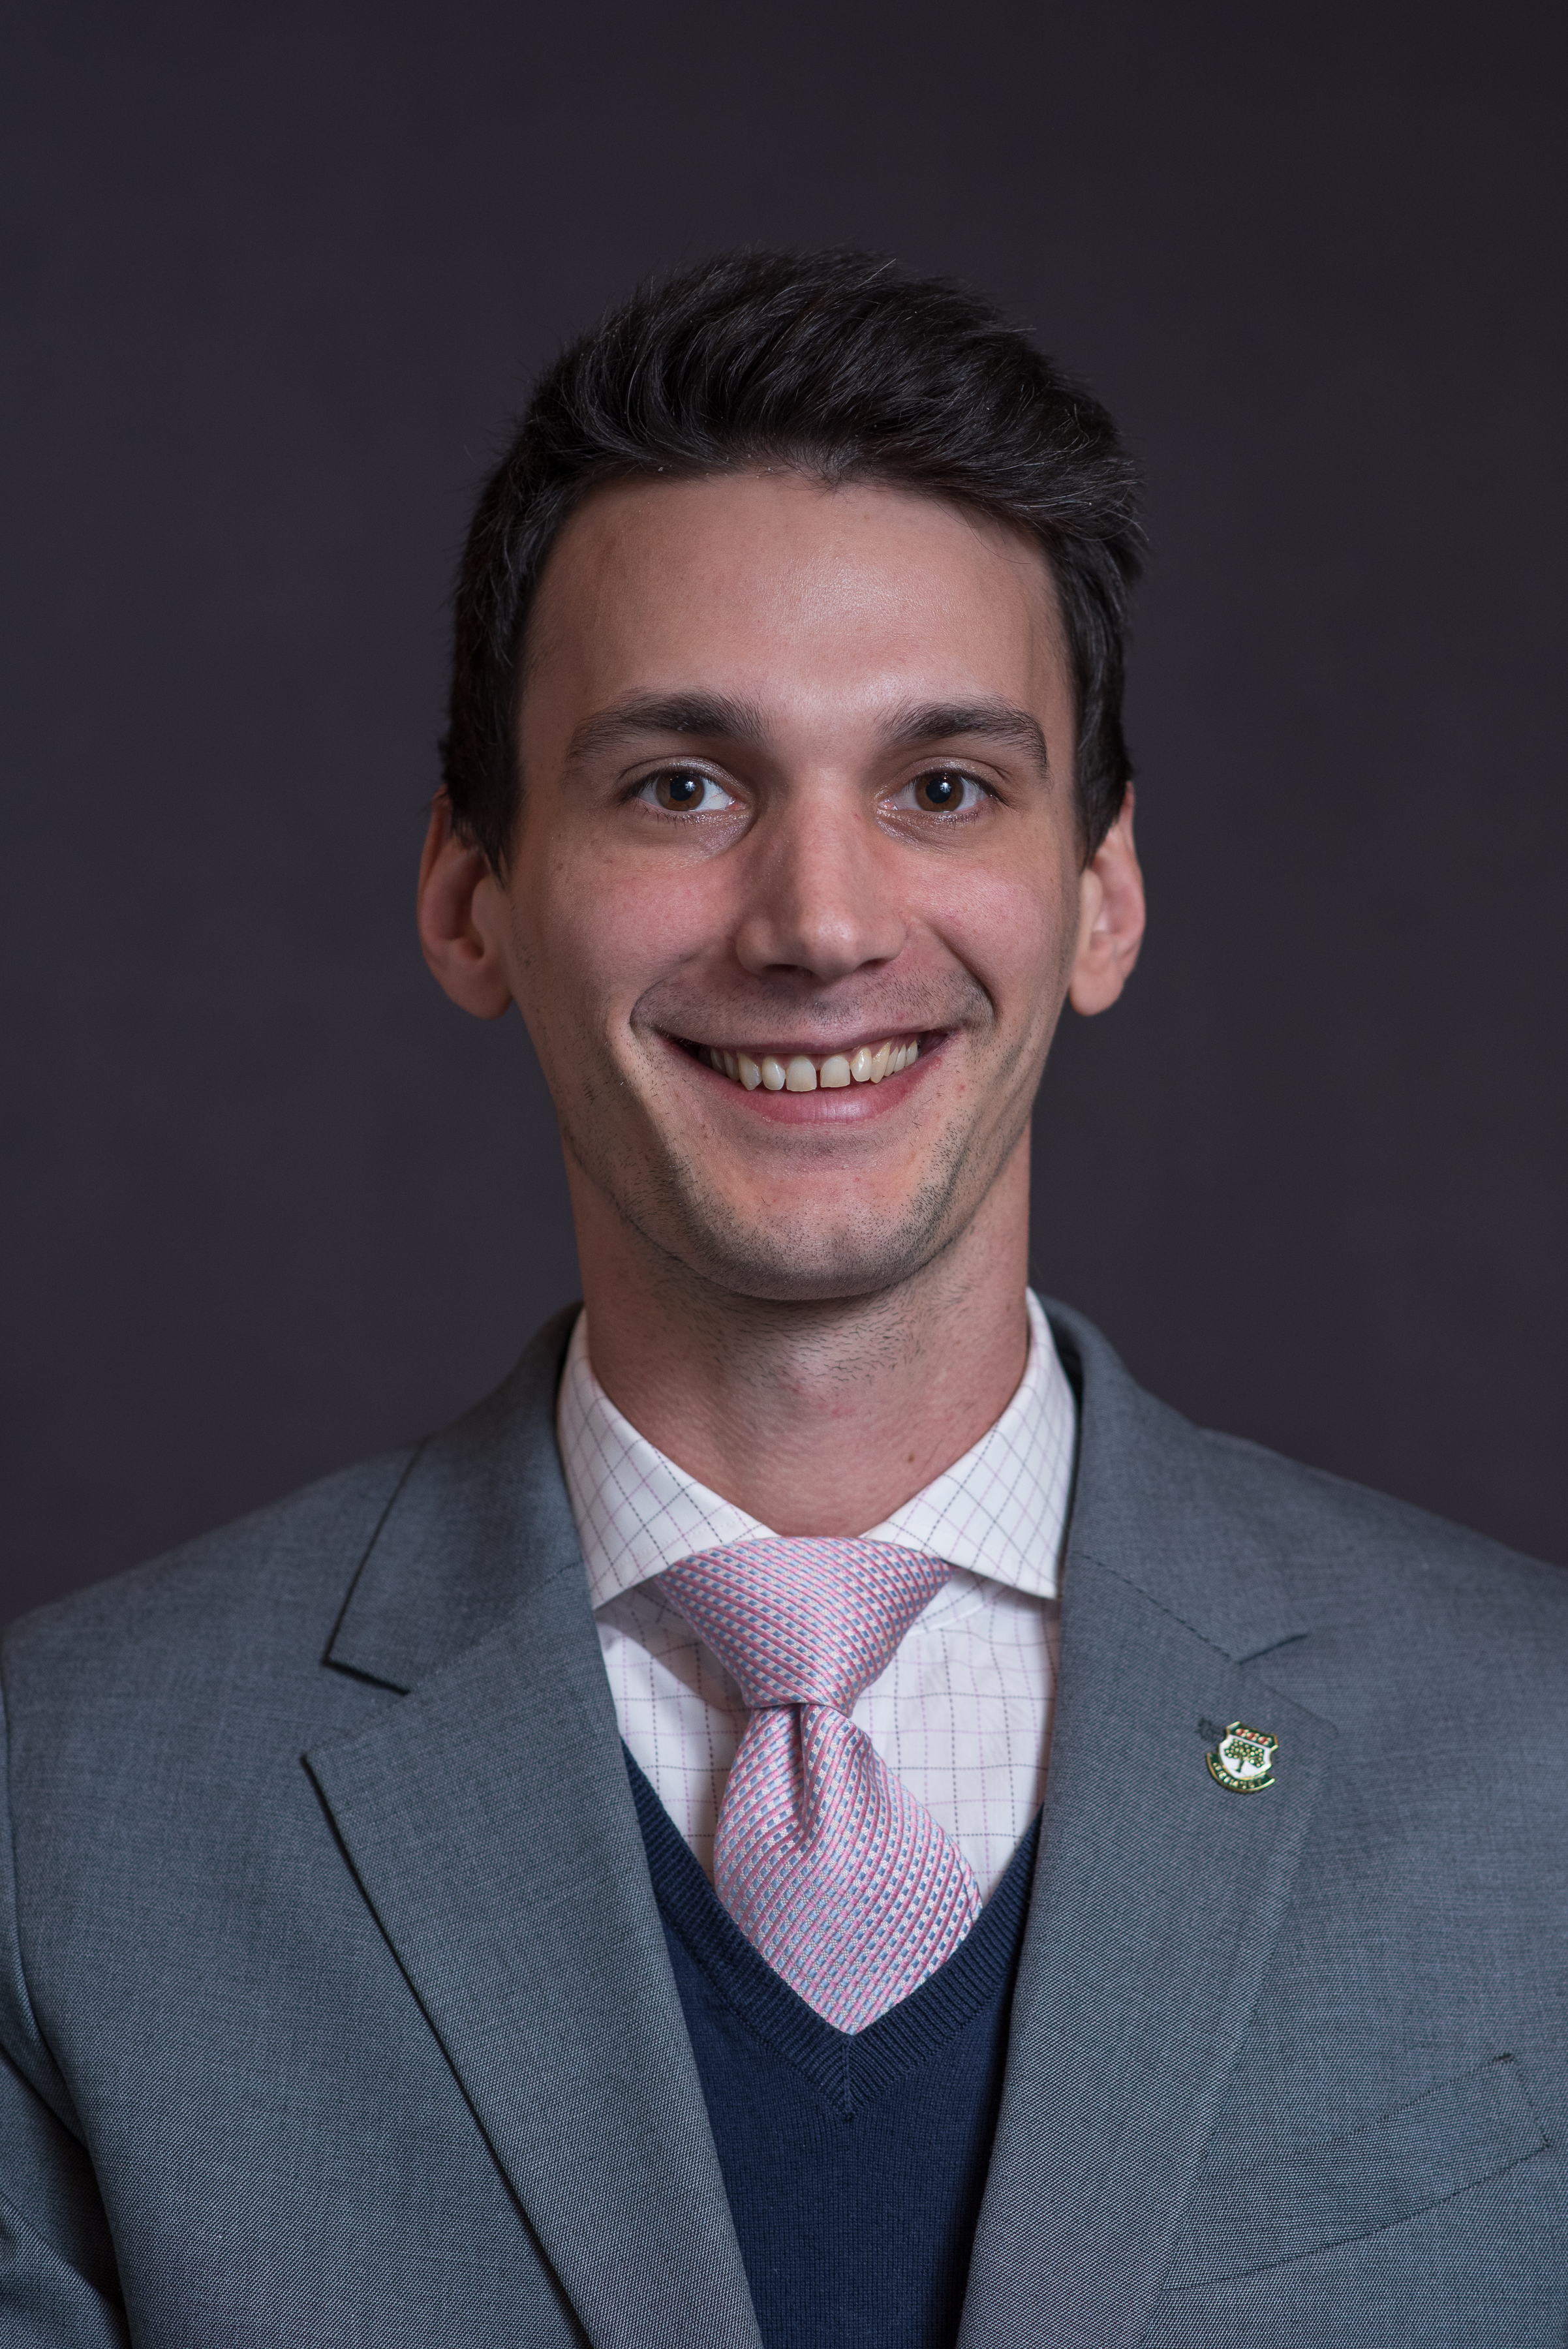 A picture of Councillor Jacob Baradziej.